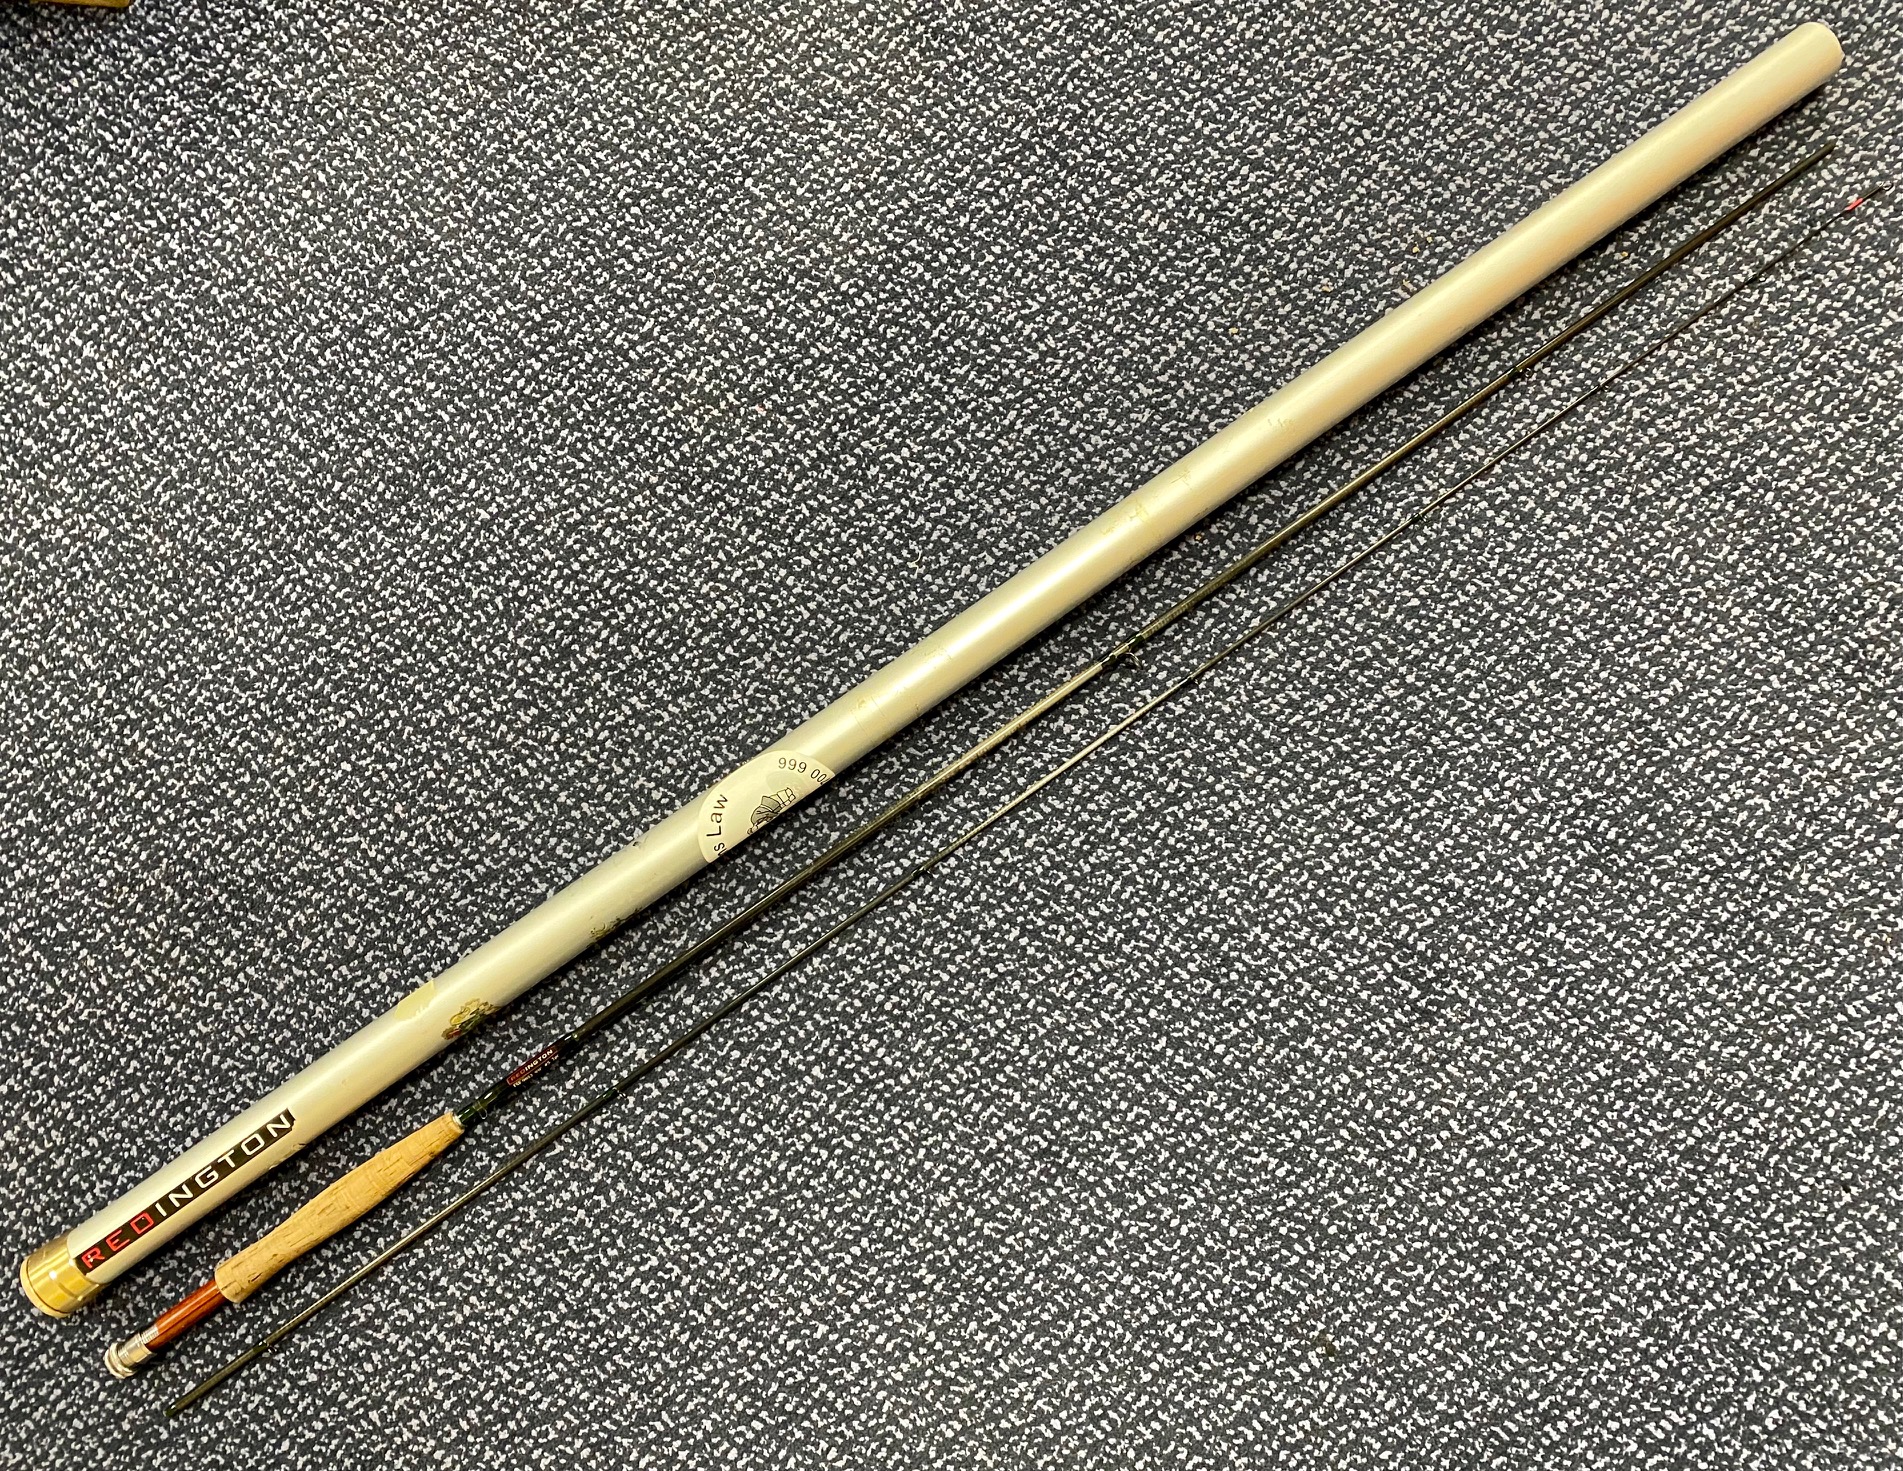 FSF 9ft #5 2 piece made in USA fly rod (in tube) - Used